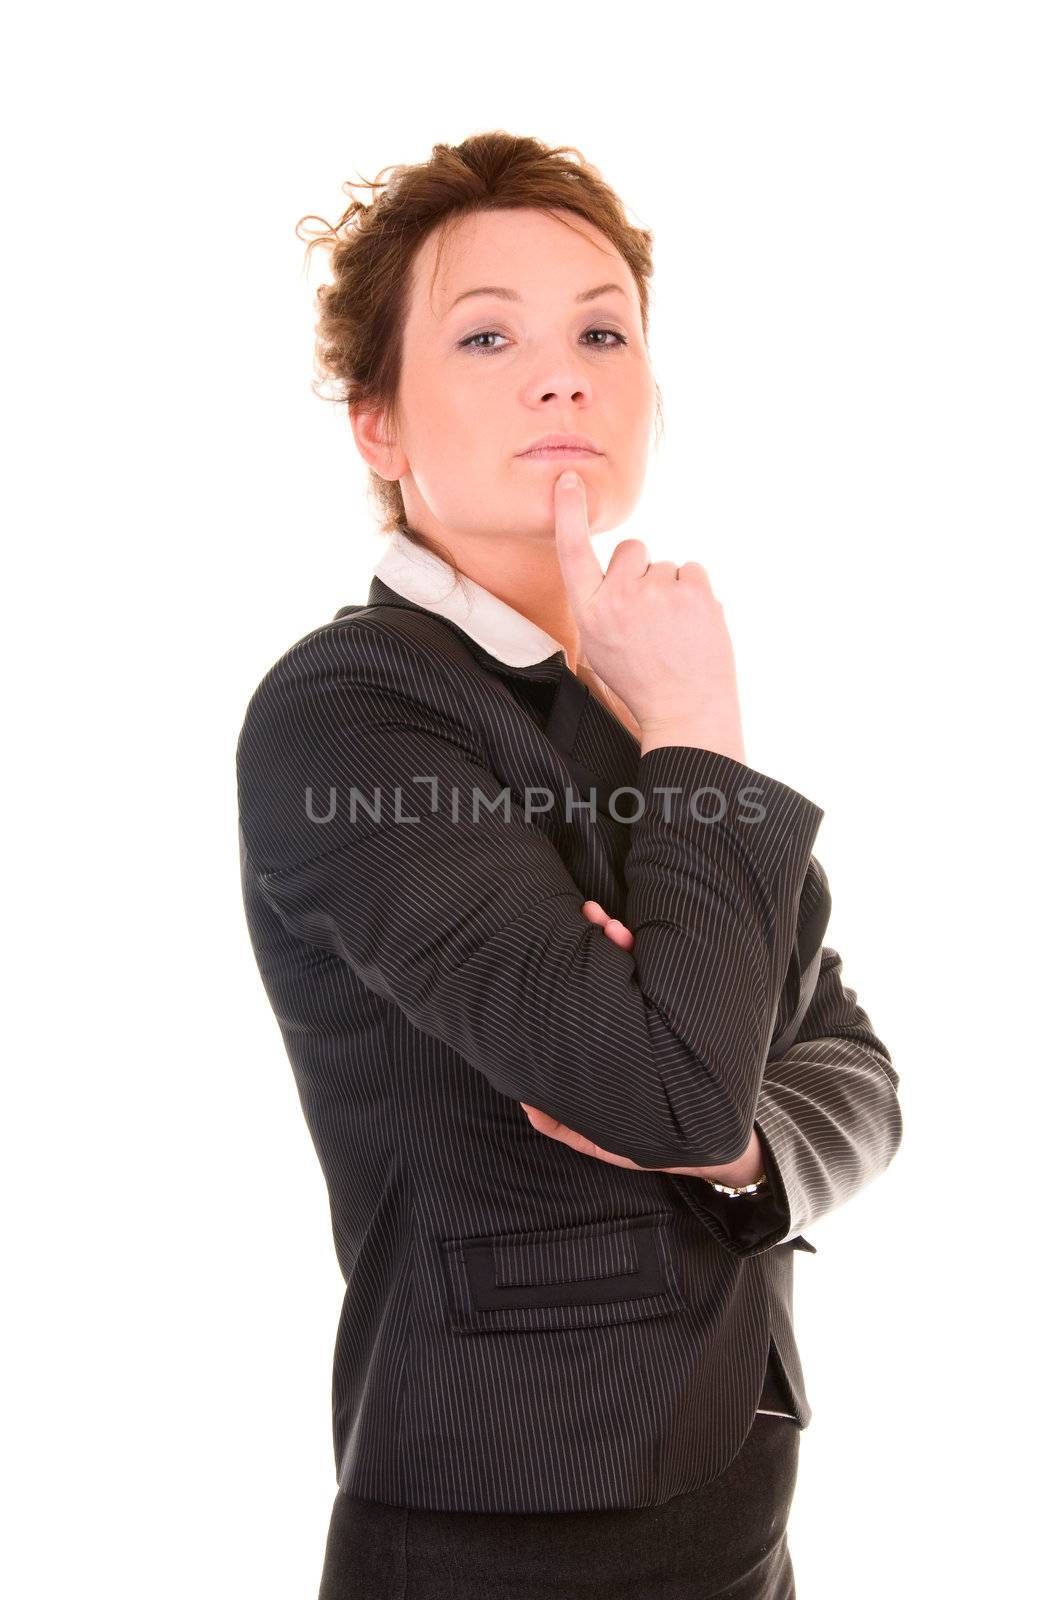 Serious business woman isolated on white background